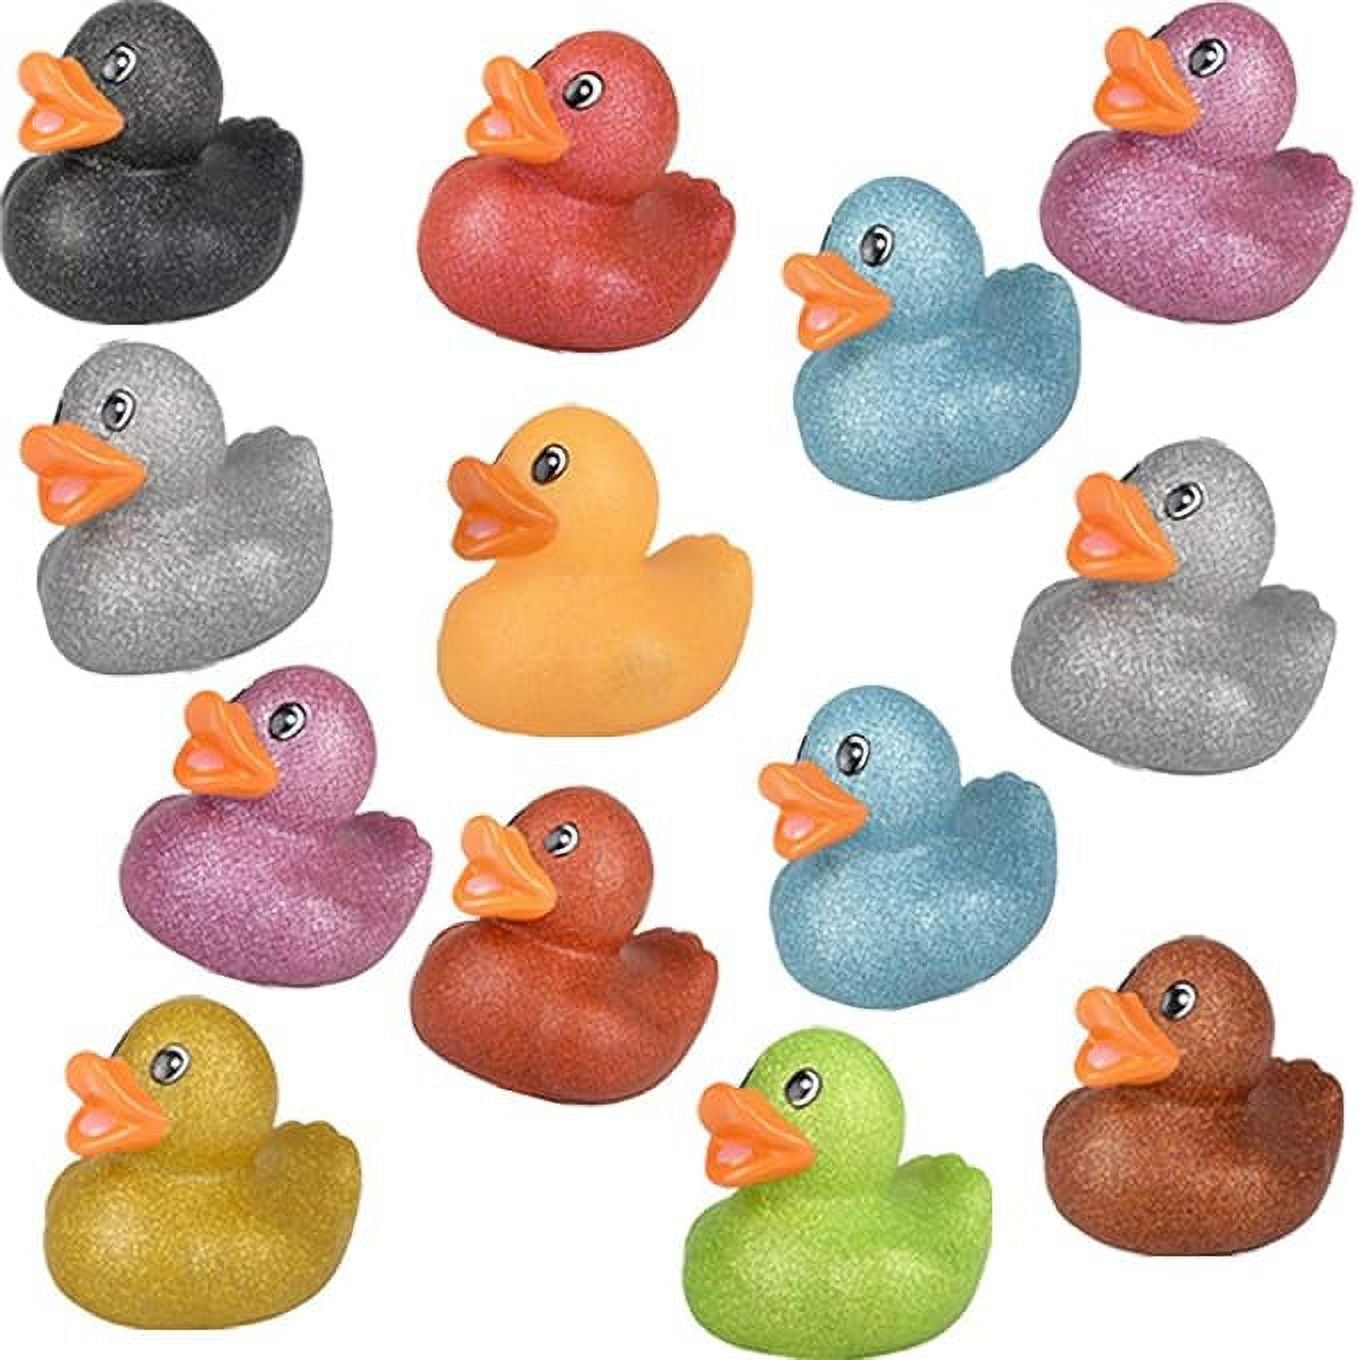 5PCS Trump Duck Rubber PVC Duck Bath Squeaky Baby Kids Animals Floats Toys  